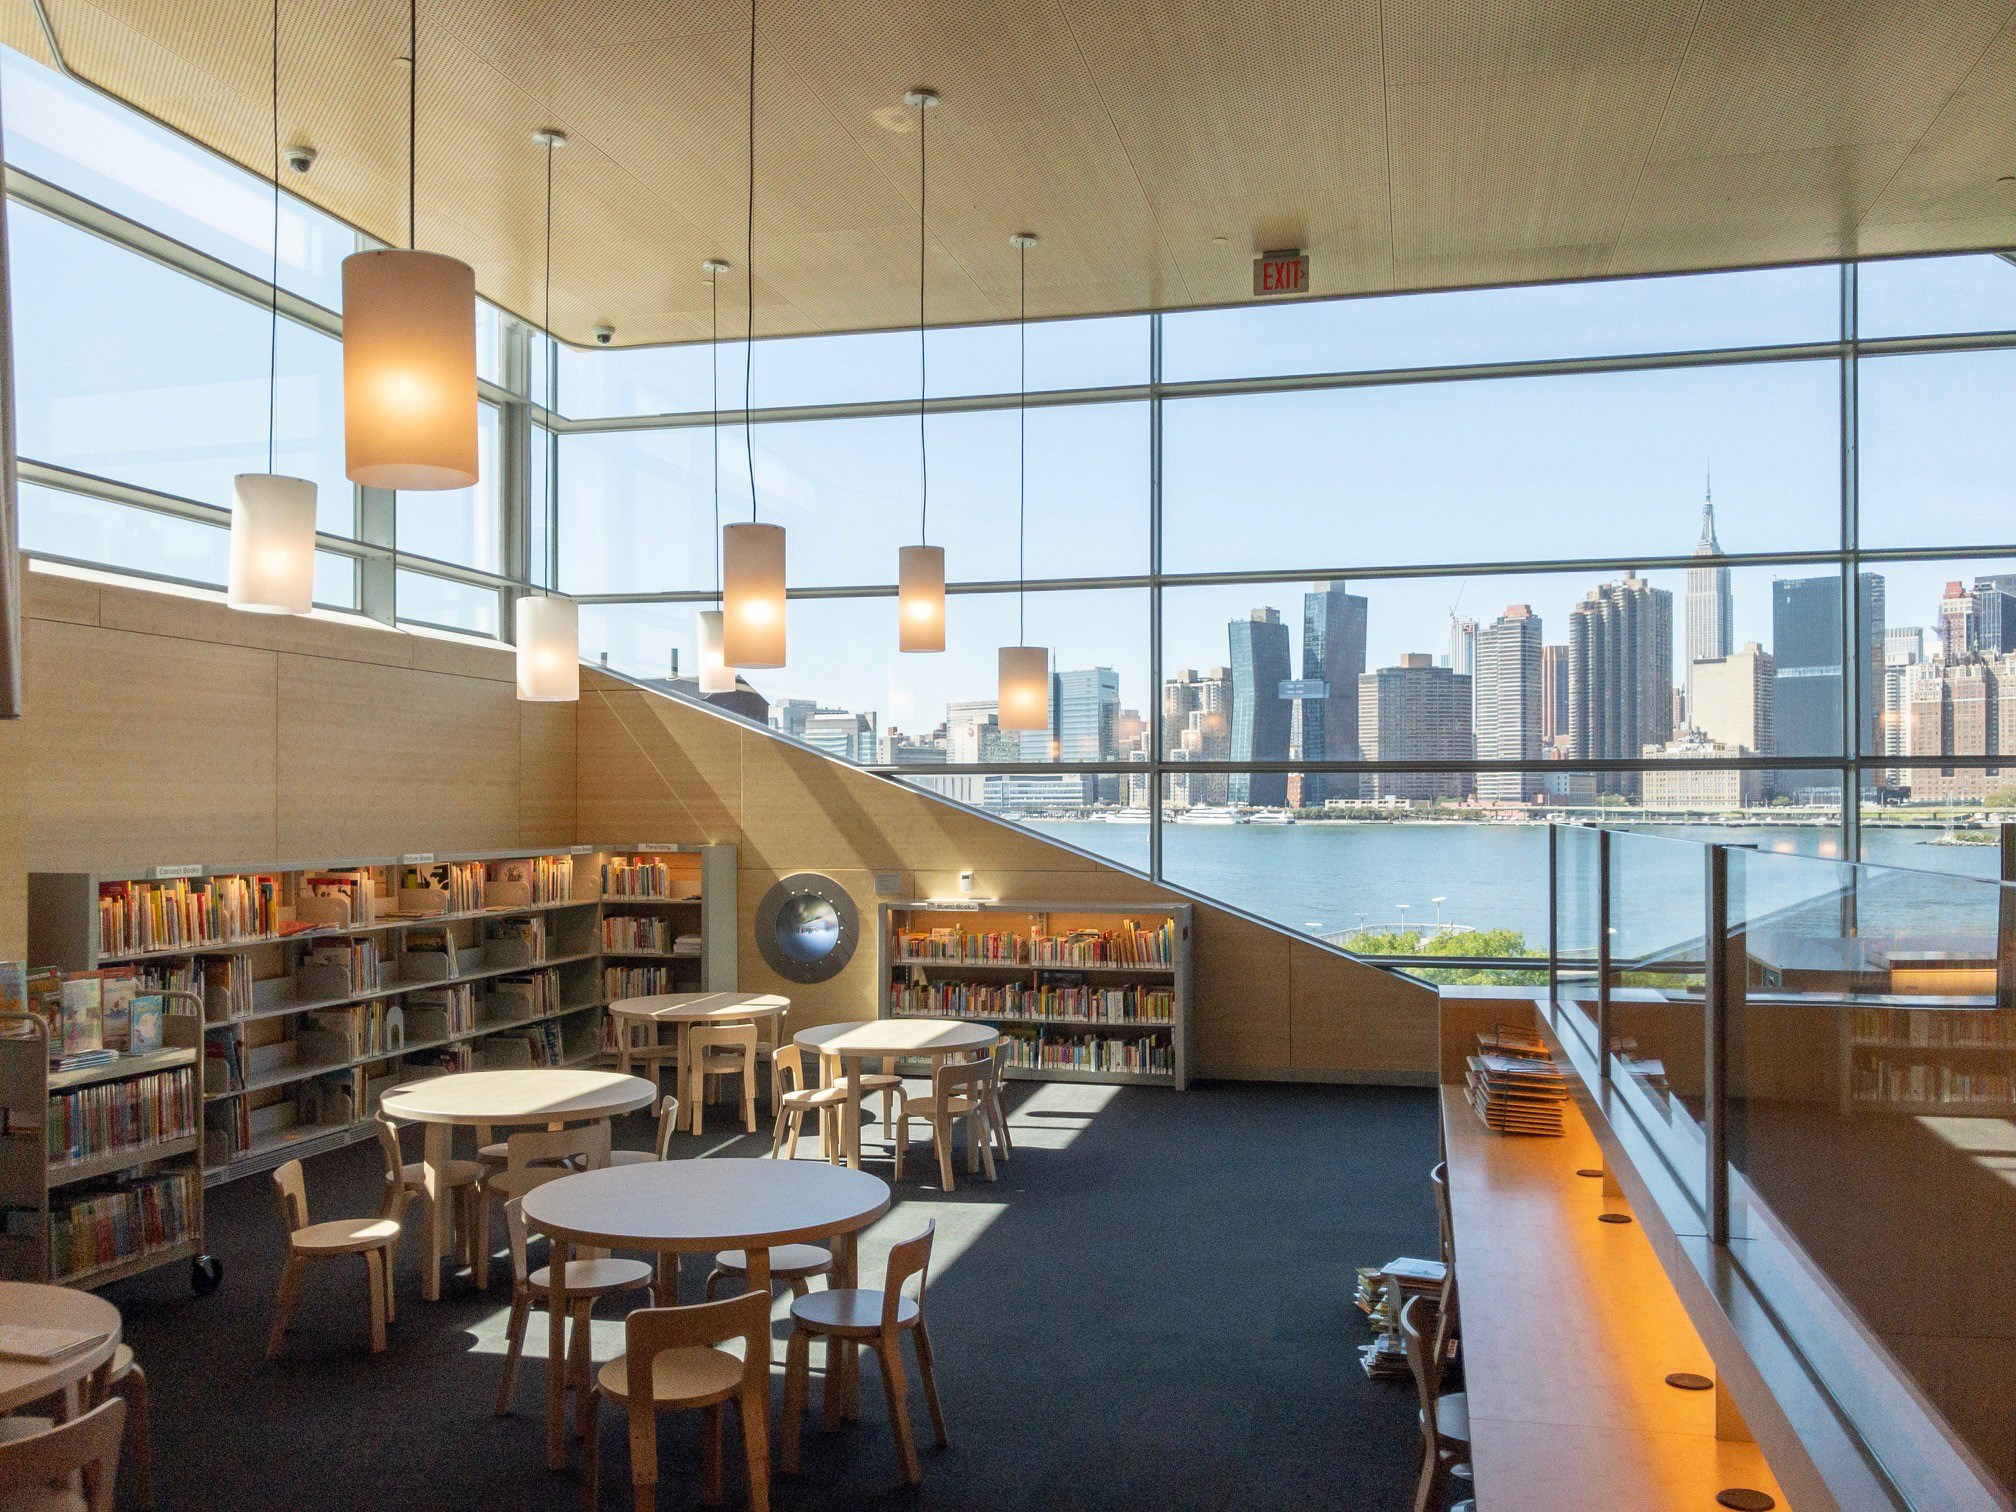 Architecture Merit Award: Hunters Point Library by Steven Holl Architects and Michael Van Valkenburgh Associates, in Long Island City, NY. Photo: Steven Holl Architects.